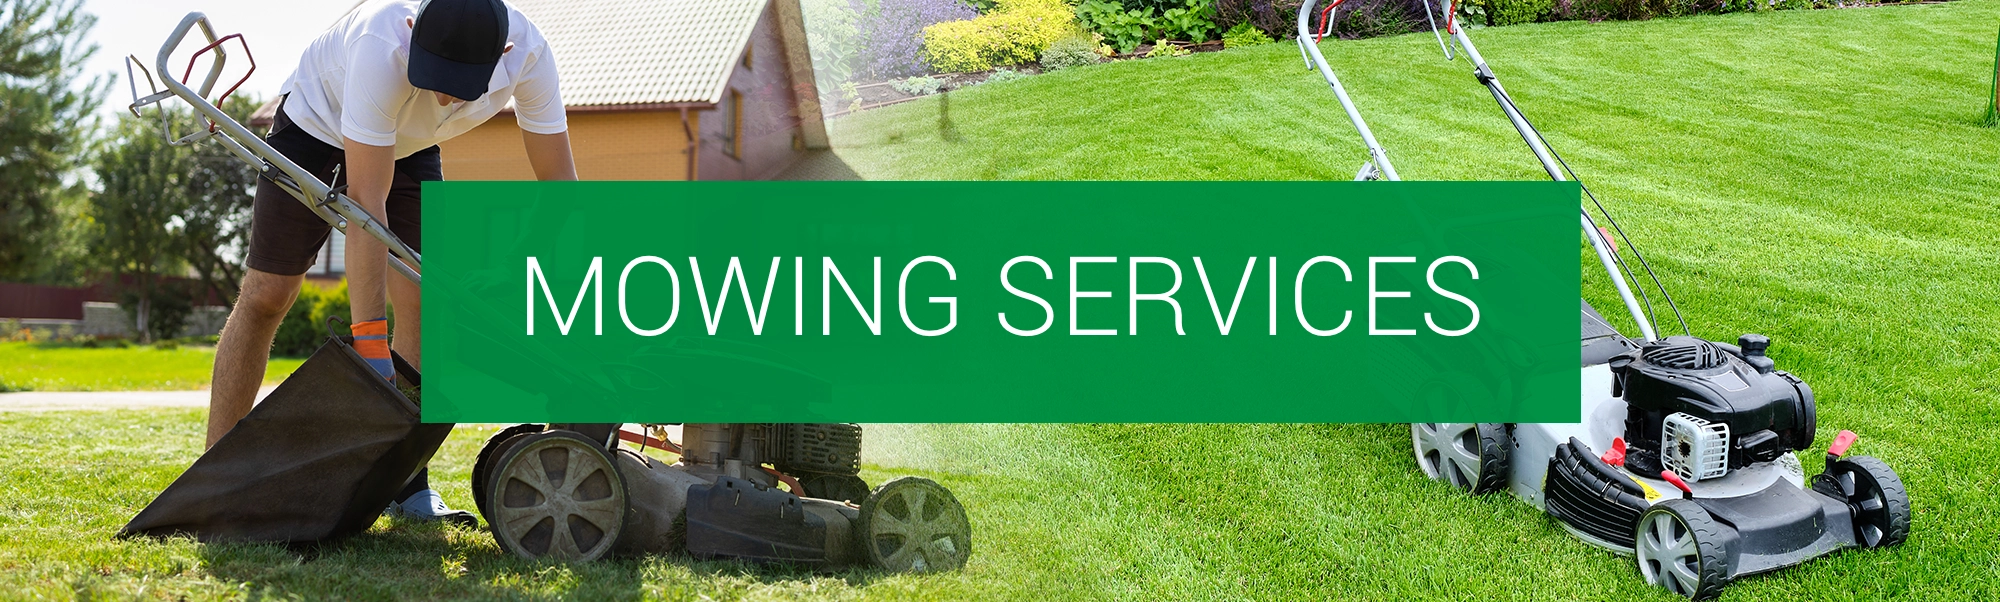 Lawn Care Services in Indiana - Mowing